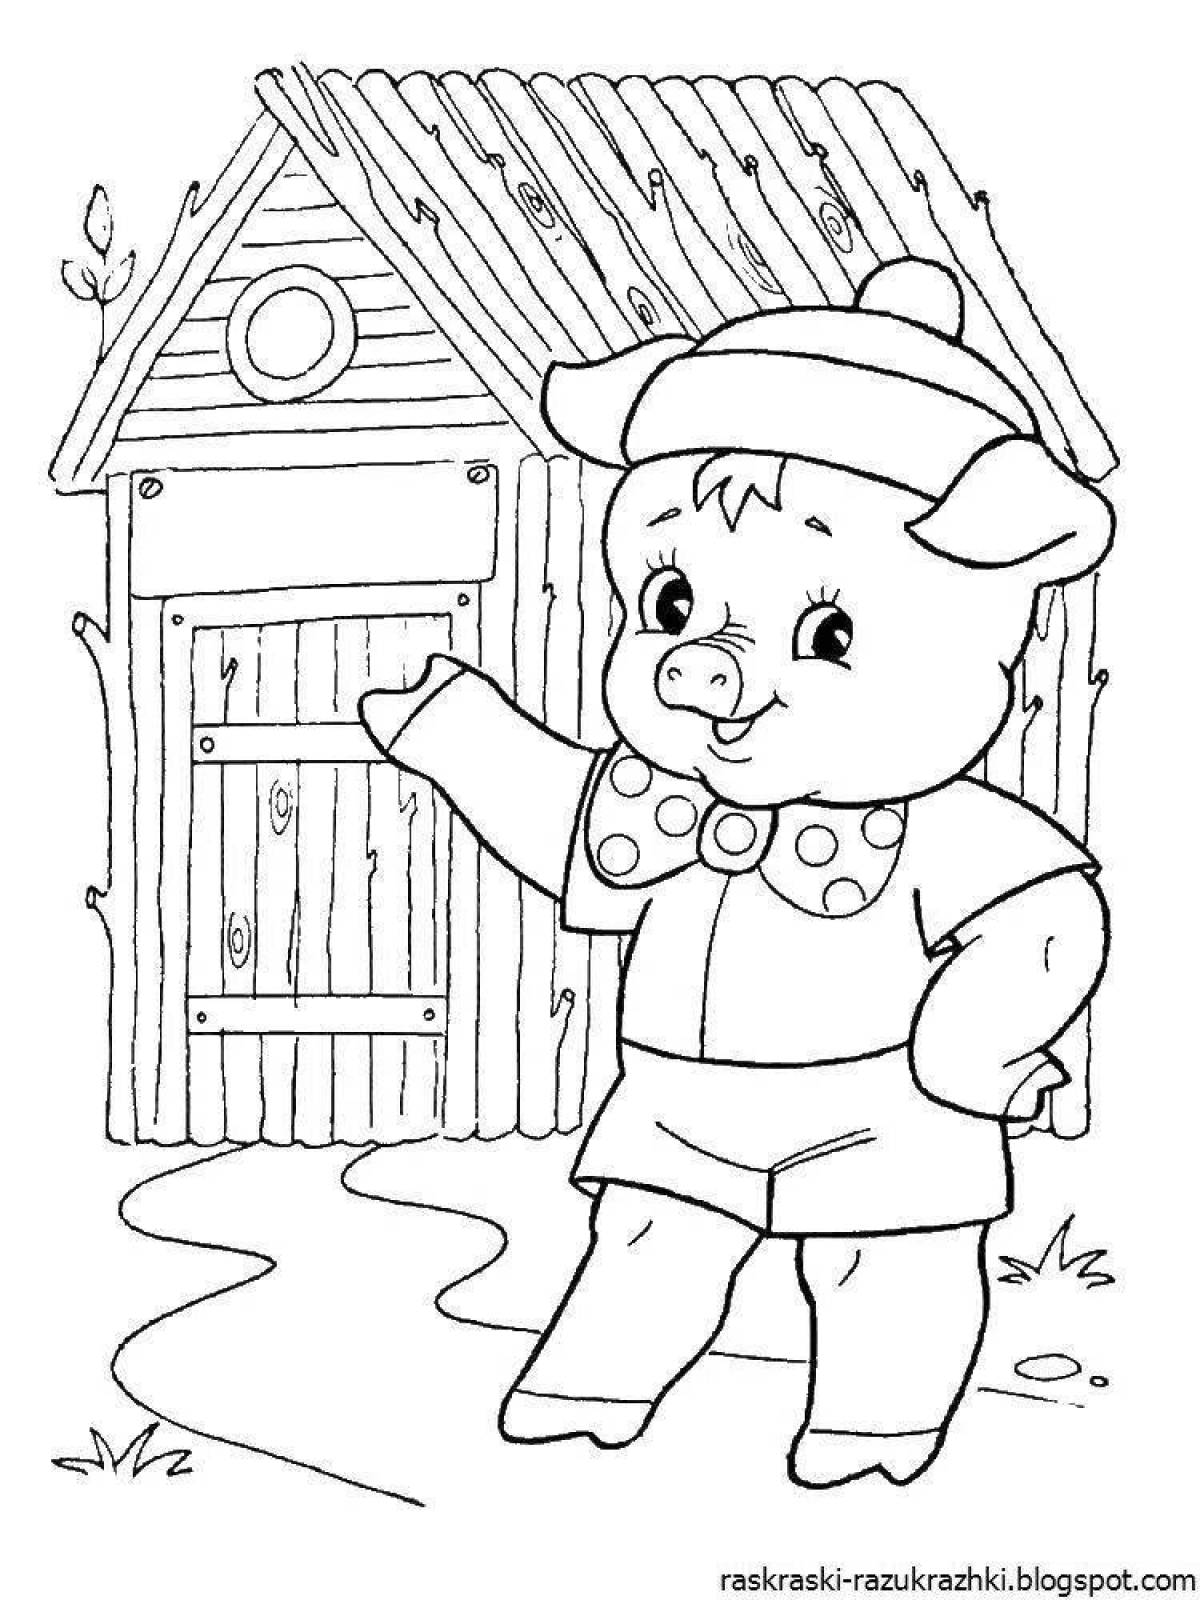 3 little pigs creative coloring book for kids